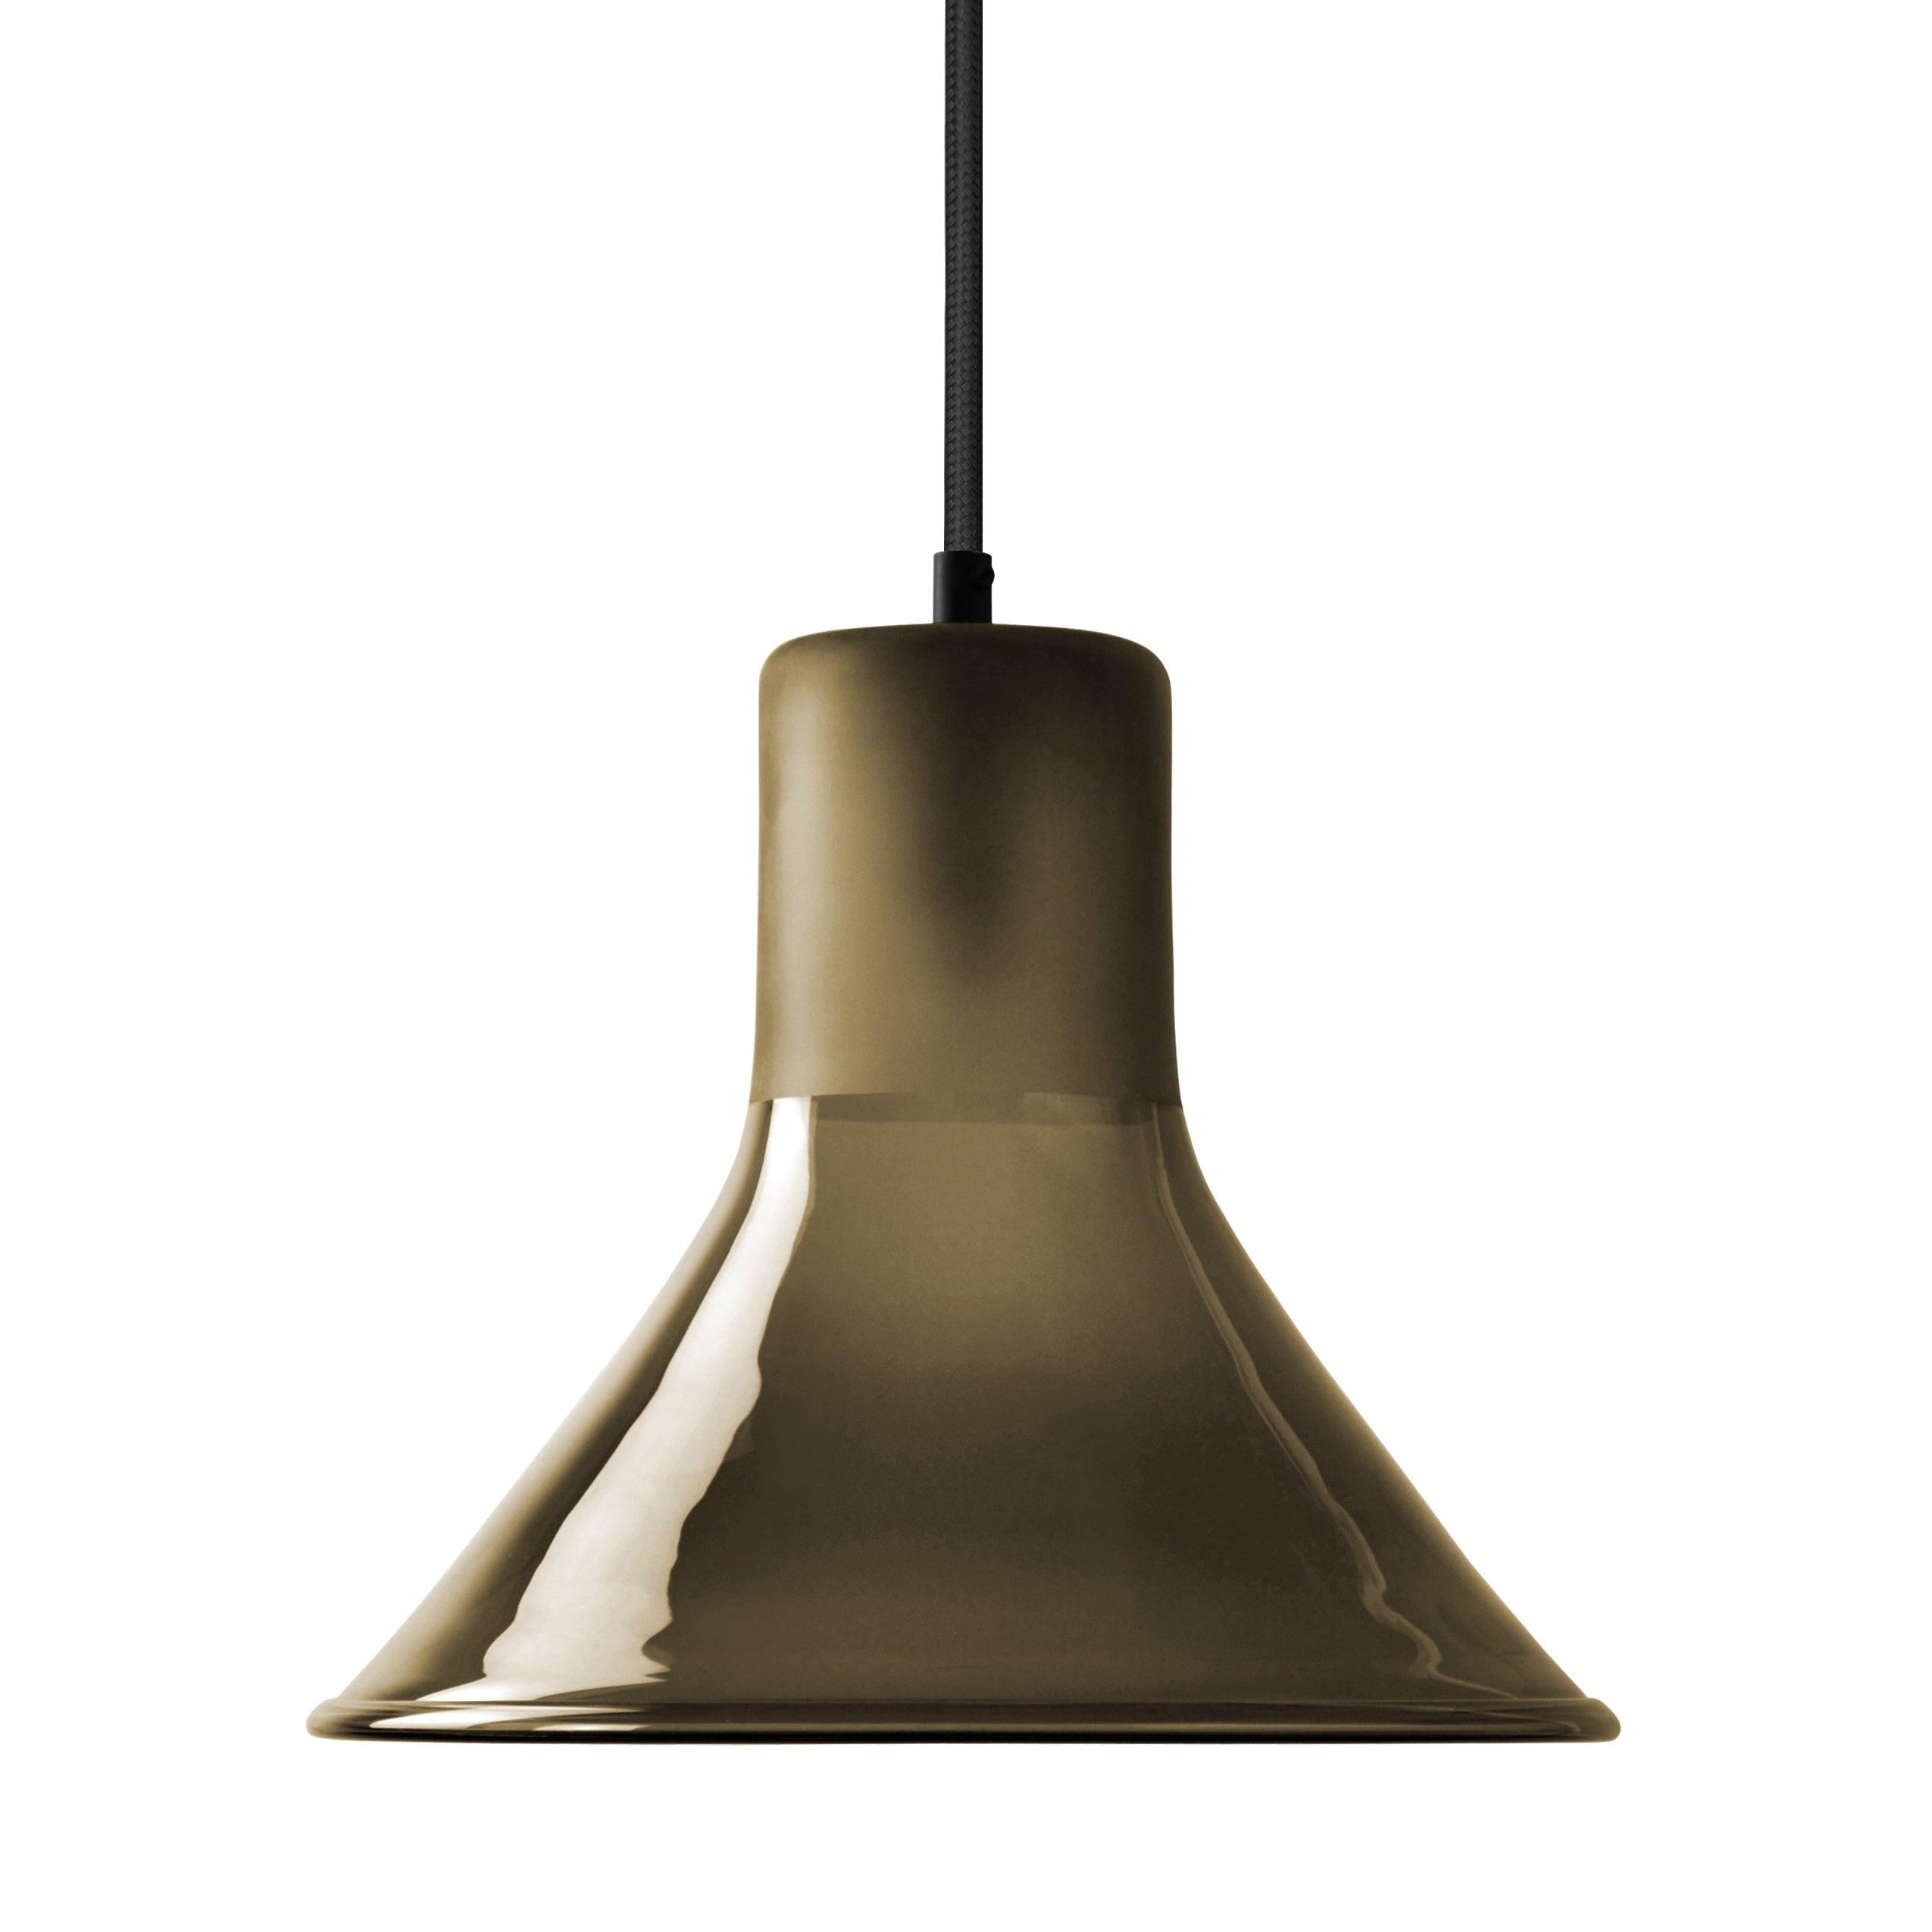 Mineheart Funnel glass pendant light in olive by Young & Battaglia from Warehouse Home 